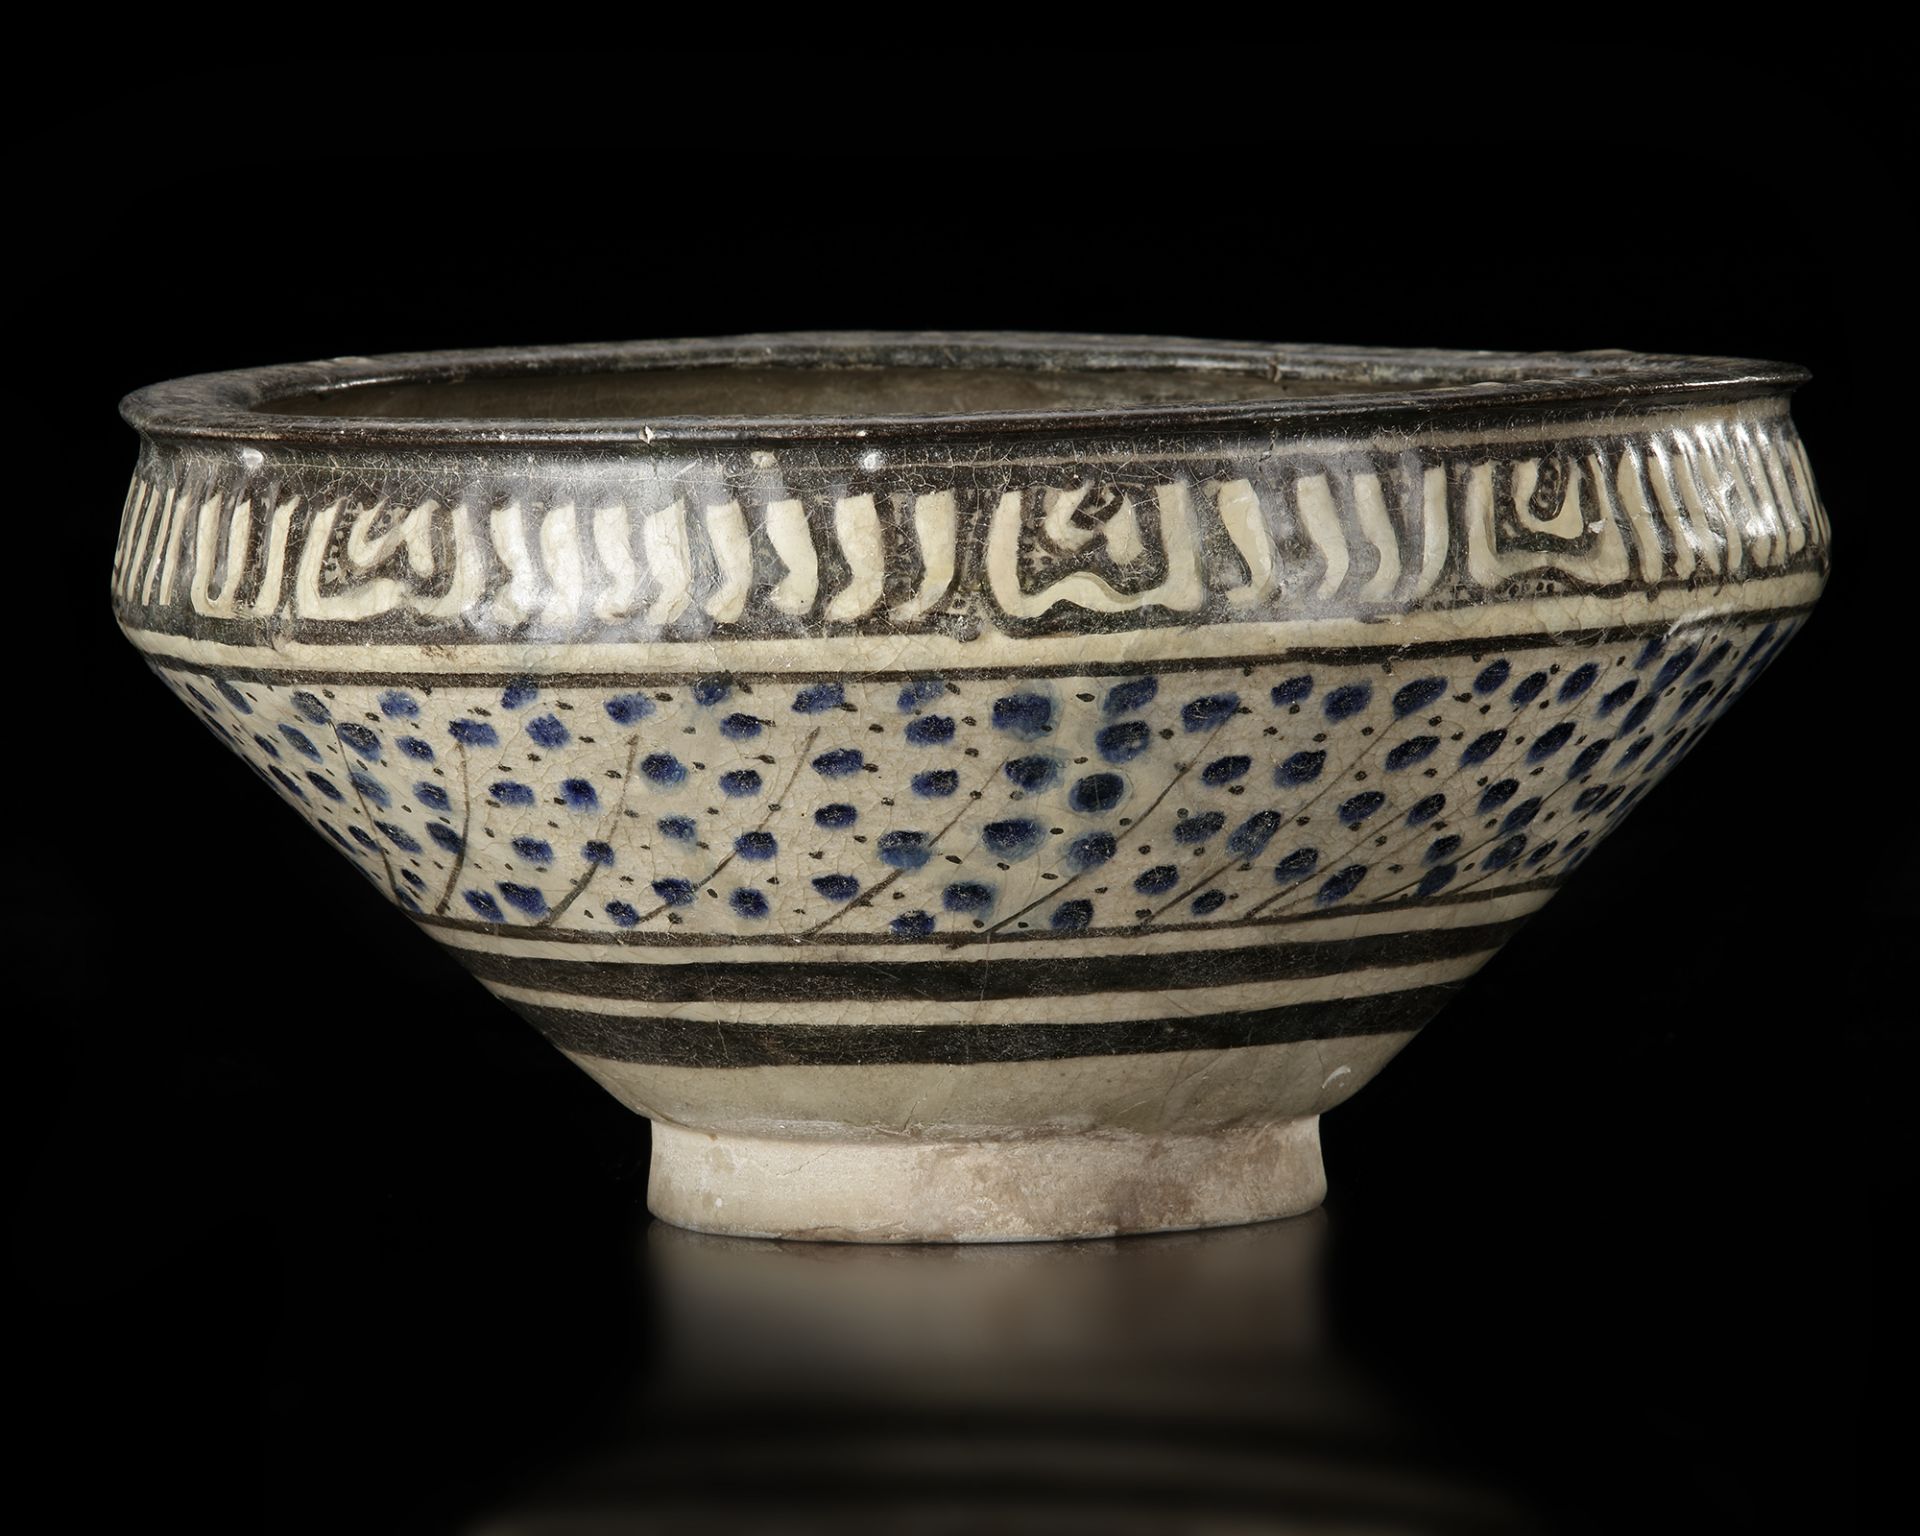 A BOWL DECORATED WITH THREE BIRDS IN FLIGHT, SULTANABAD, 13TH-14TH CENTURY - Image 2 of 4